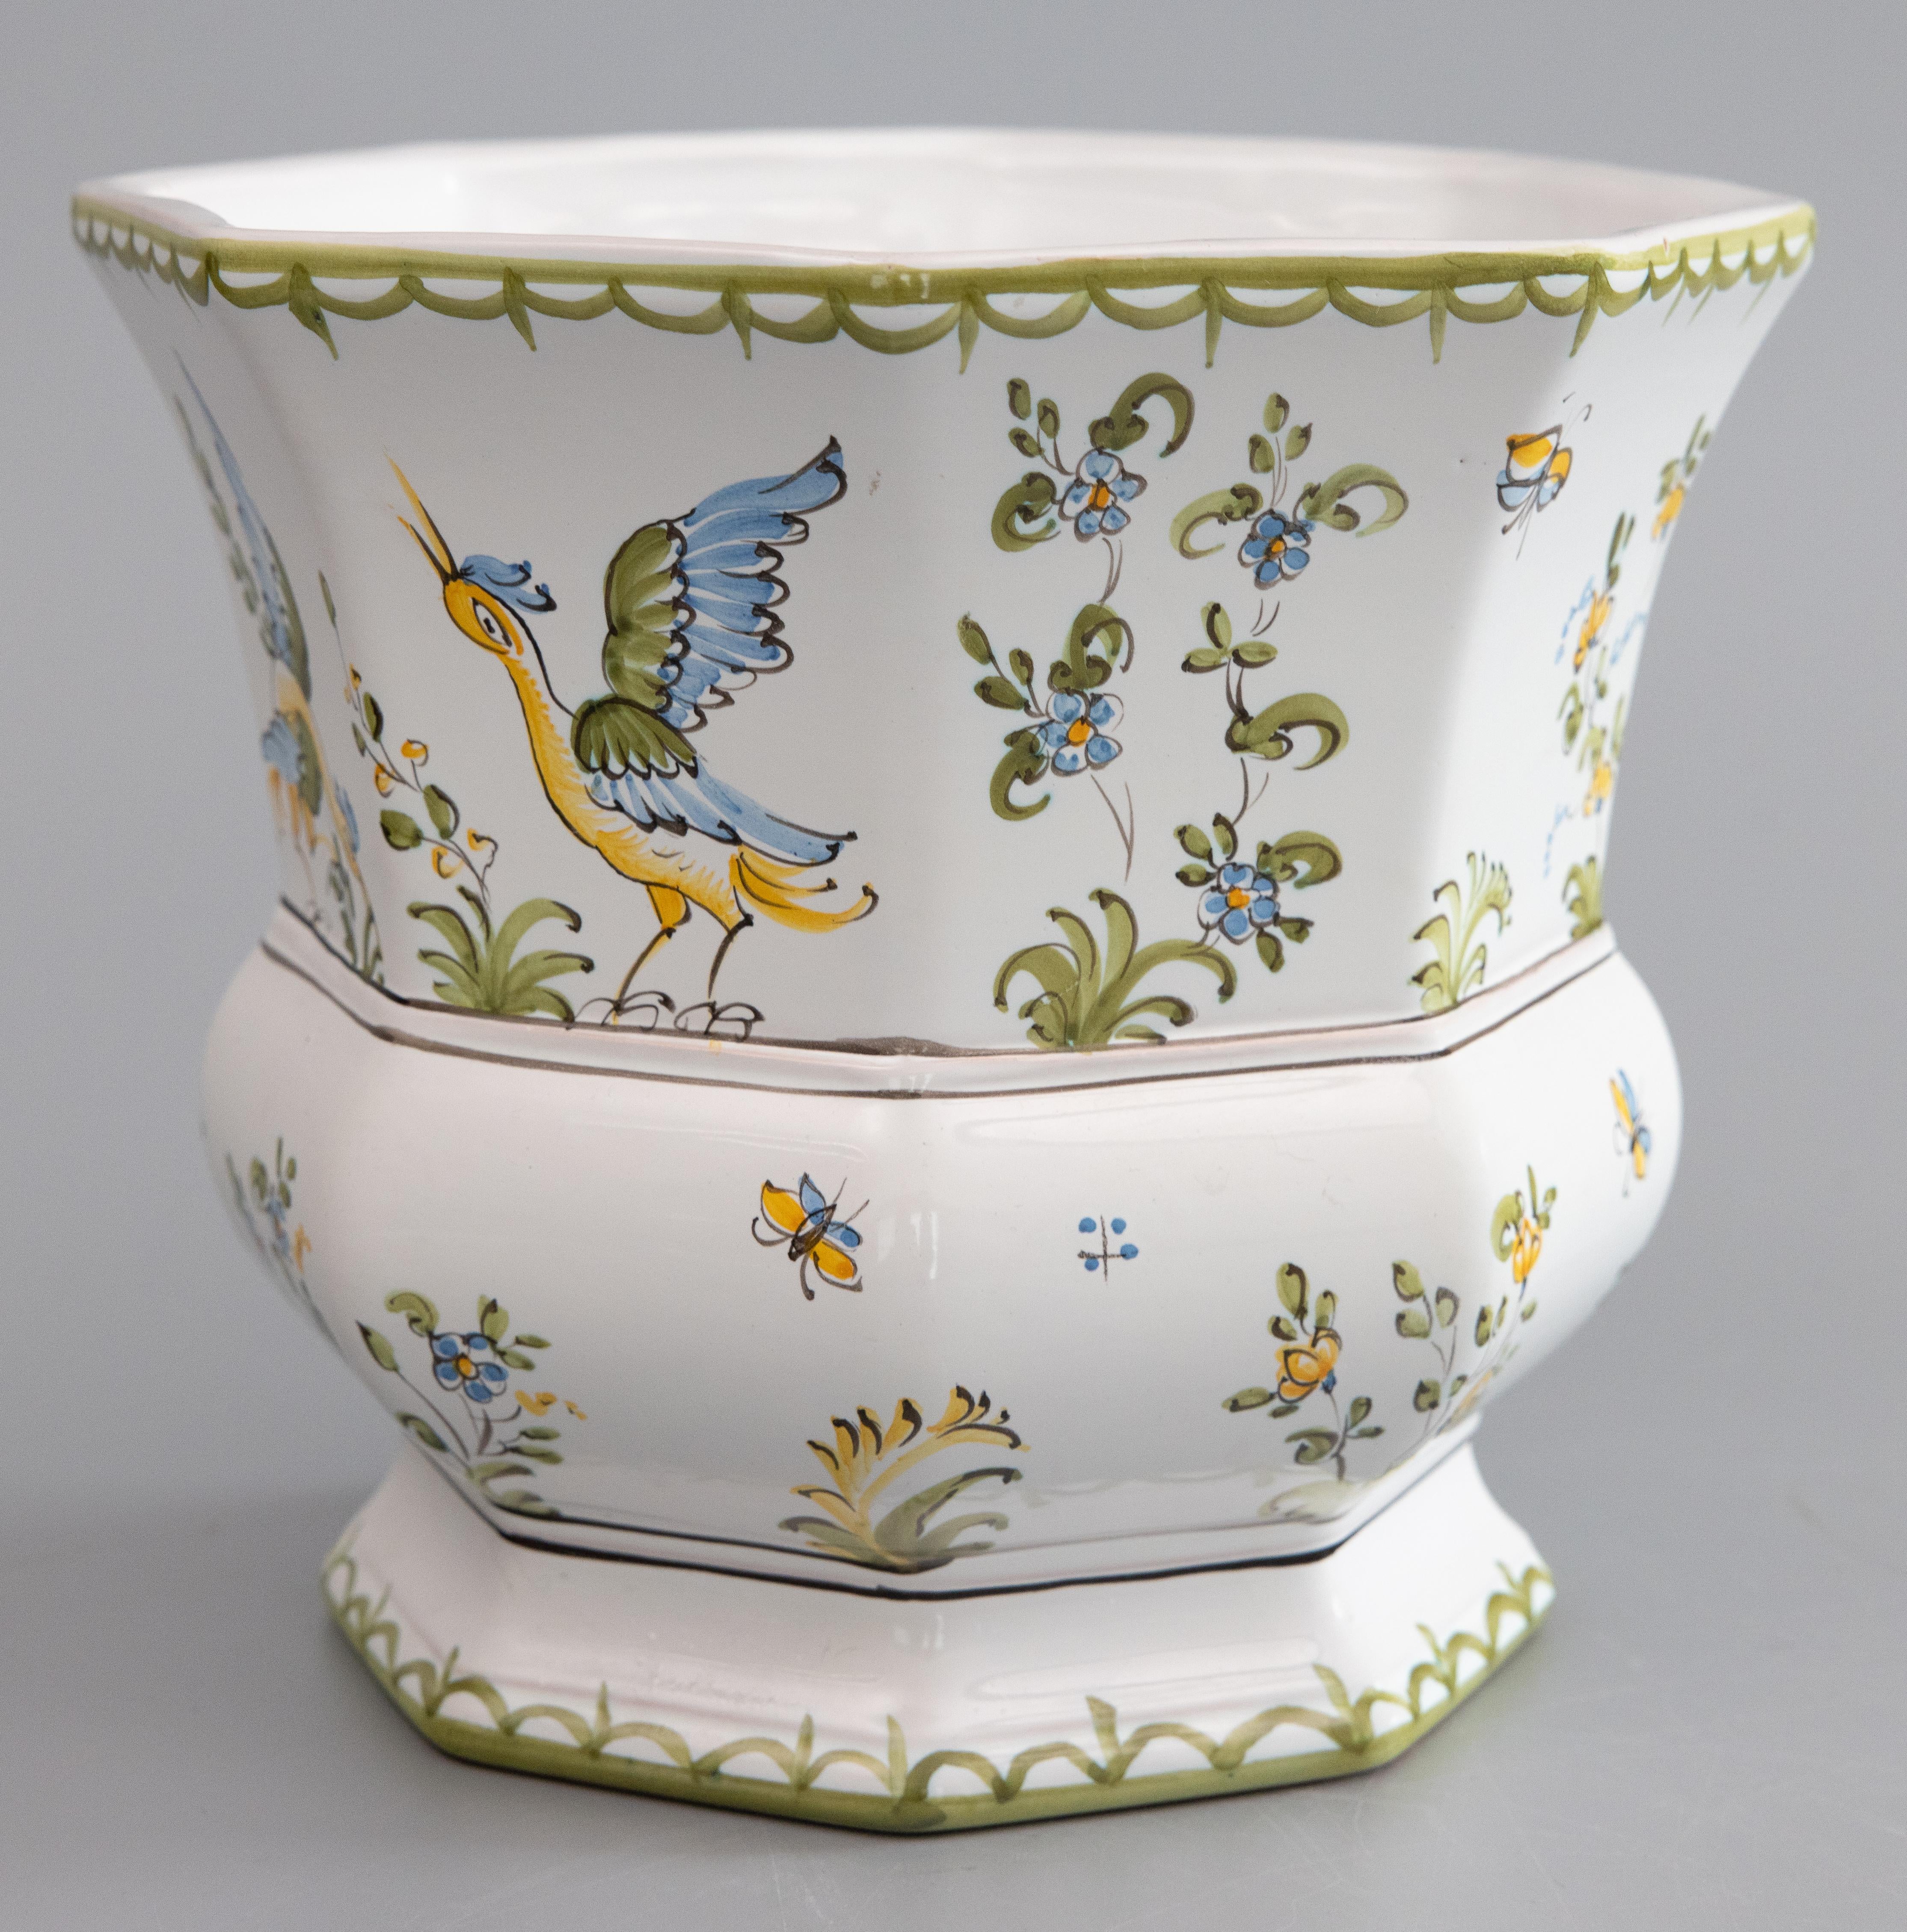 A lovely vintage faience jardiniere / planter / cache pot from Lallier-Moustiers in France. This beautiful planter has an octagonal shape with elegant hand painted birds, insects, and flowers. Maker's mark on reverse. It would be perfect with your